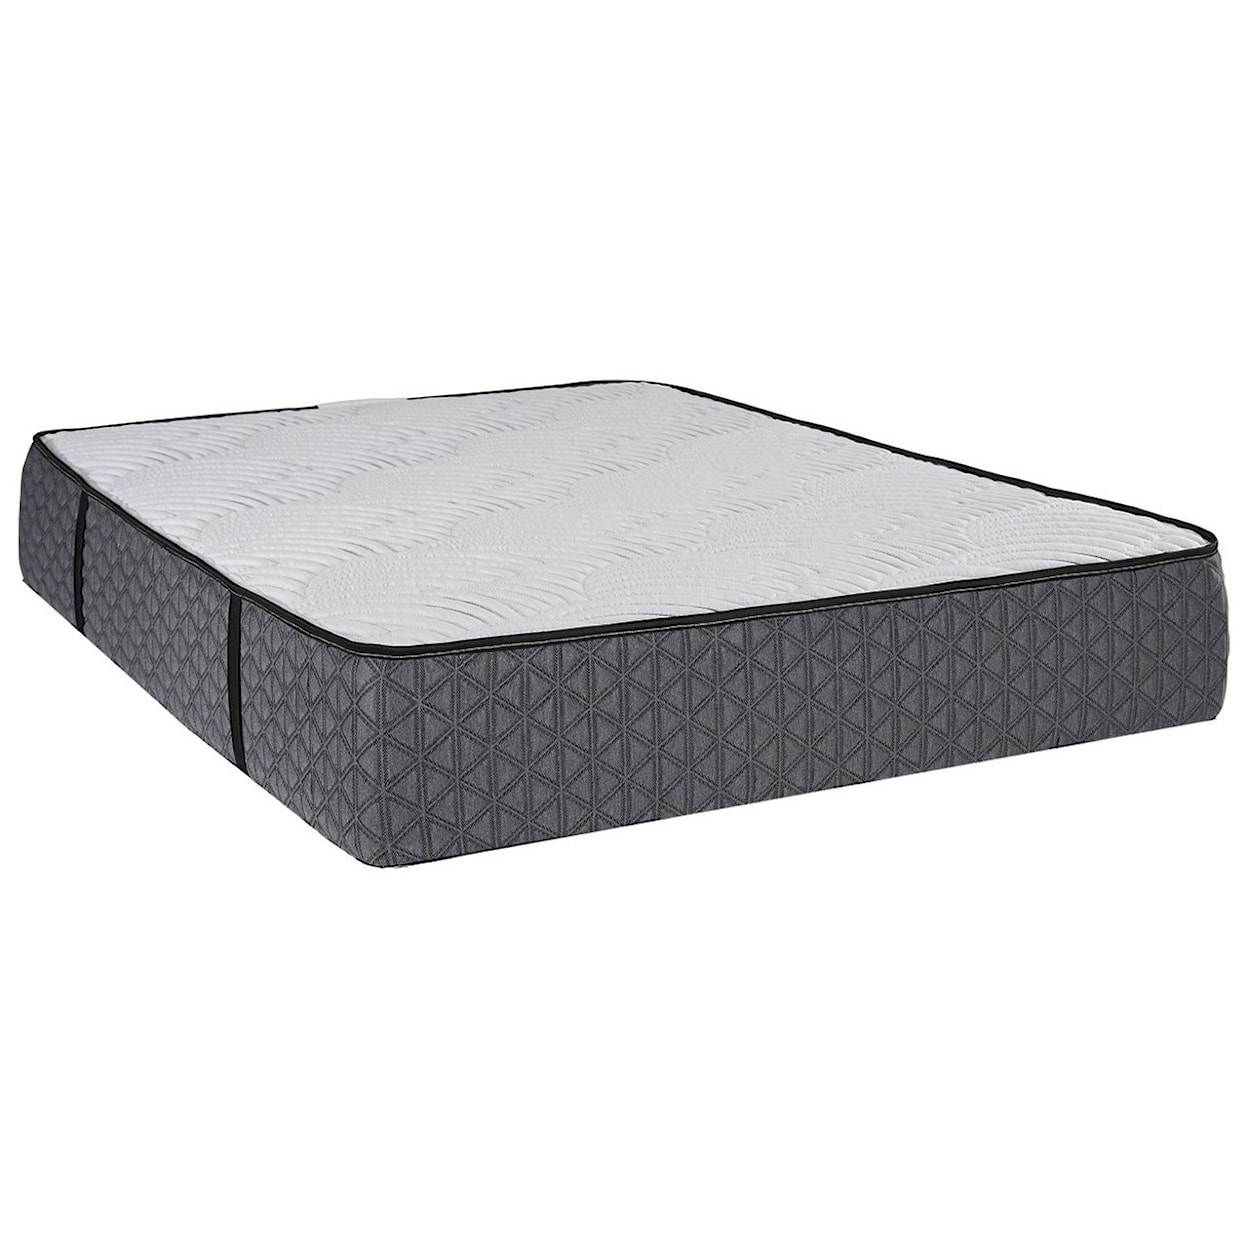 Restonic Aphrodite Firm Full Pocketed Coil Mattress